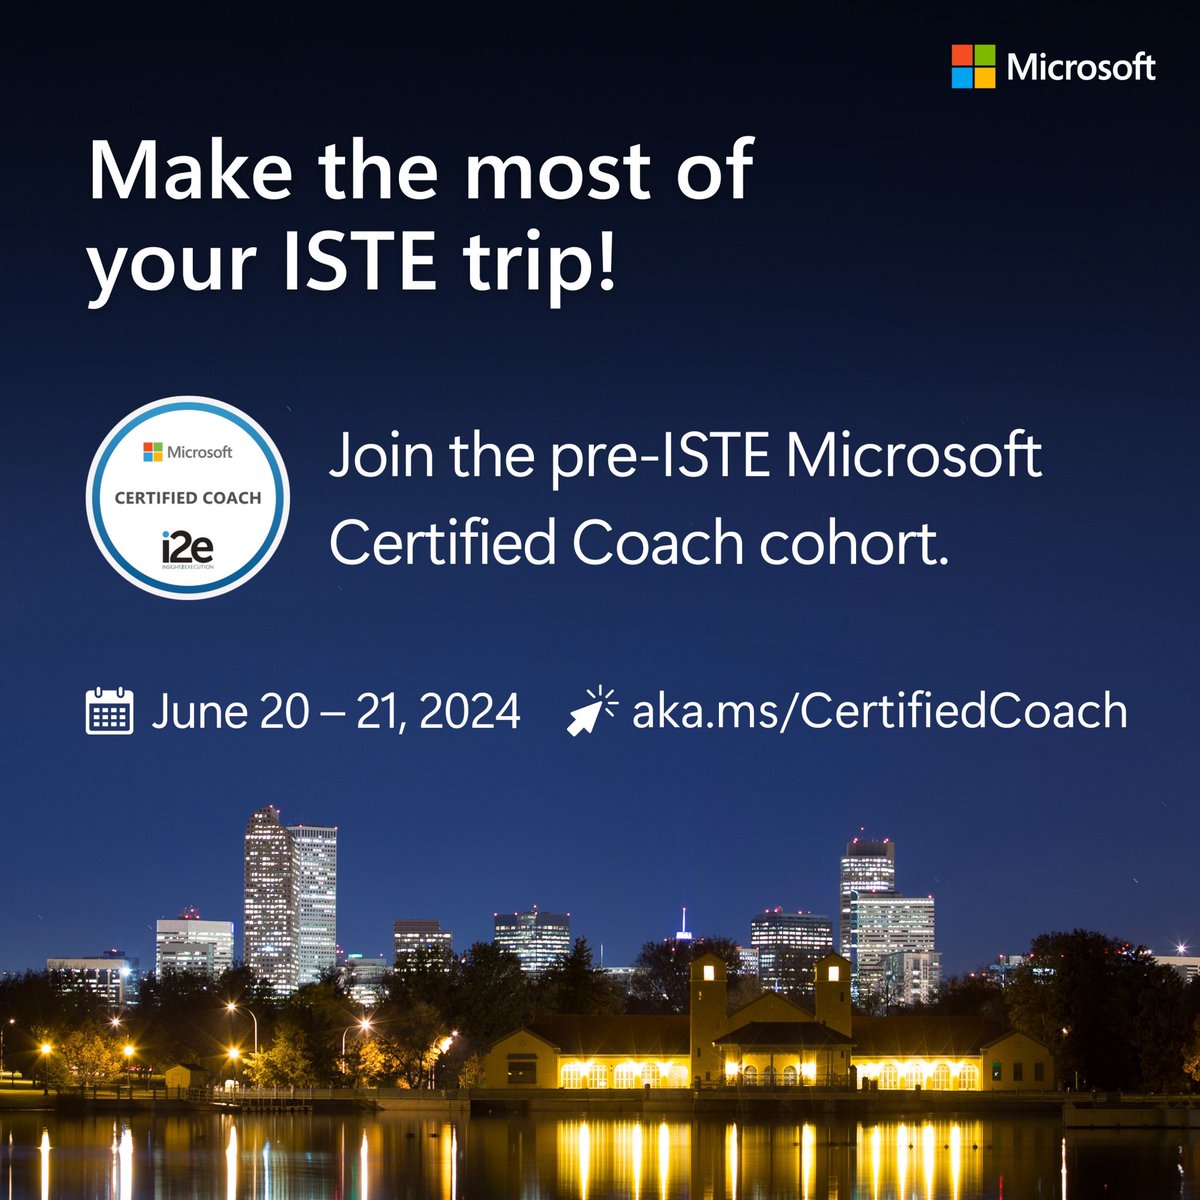 Are you heading to #ISTELive? Join the #i2eEDU Microsoft Certified Coach cohort in Denver a few days earlier! Registration is open so snag your seat today. Have questions? Join our next info session on 4/11 & score a discount on your registration! 🔗 aka.ms/CertifiedCoach…